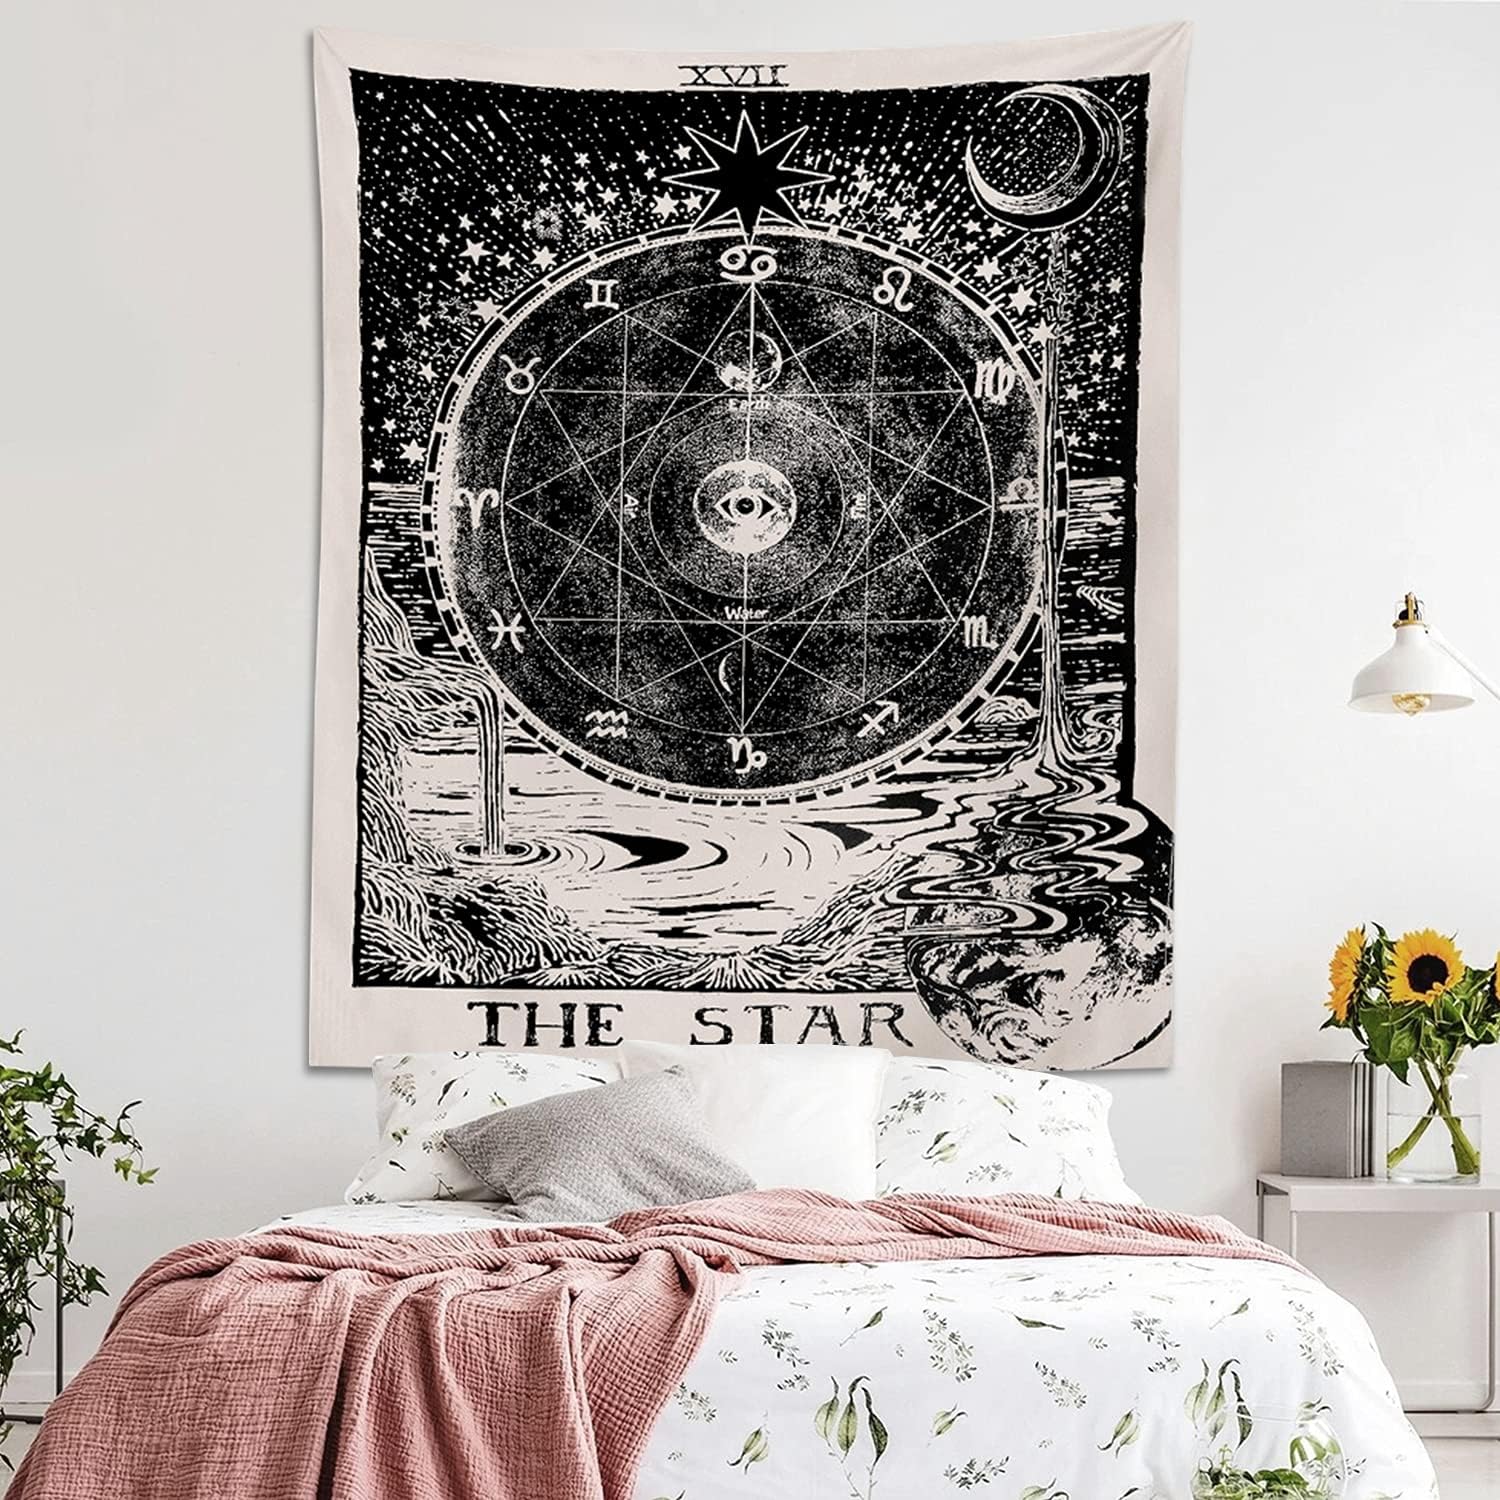 ZHH The Moon Tapestry Mysterious Tarot Astrology Wall Hanging European Medieval Divination Vintage Mysterious Tapestries Wall Art for Bedroom,Living Room,Dorm (59”×51)